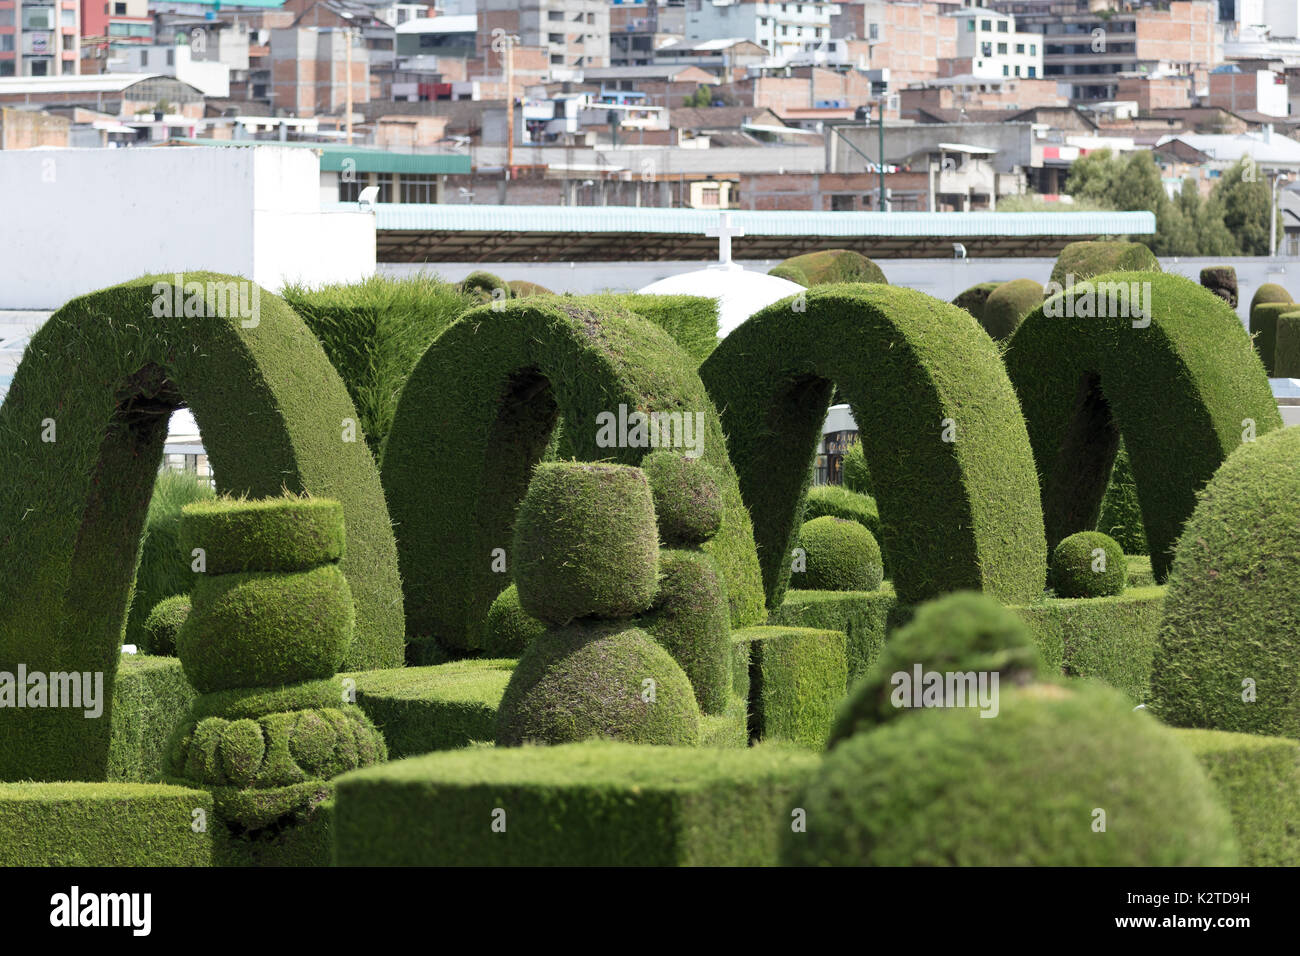 May 16, 2017 Tulcan, Ecuador: green arches in the extensive topiary of the local cemetery Stock Photo